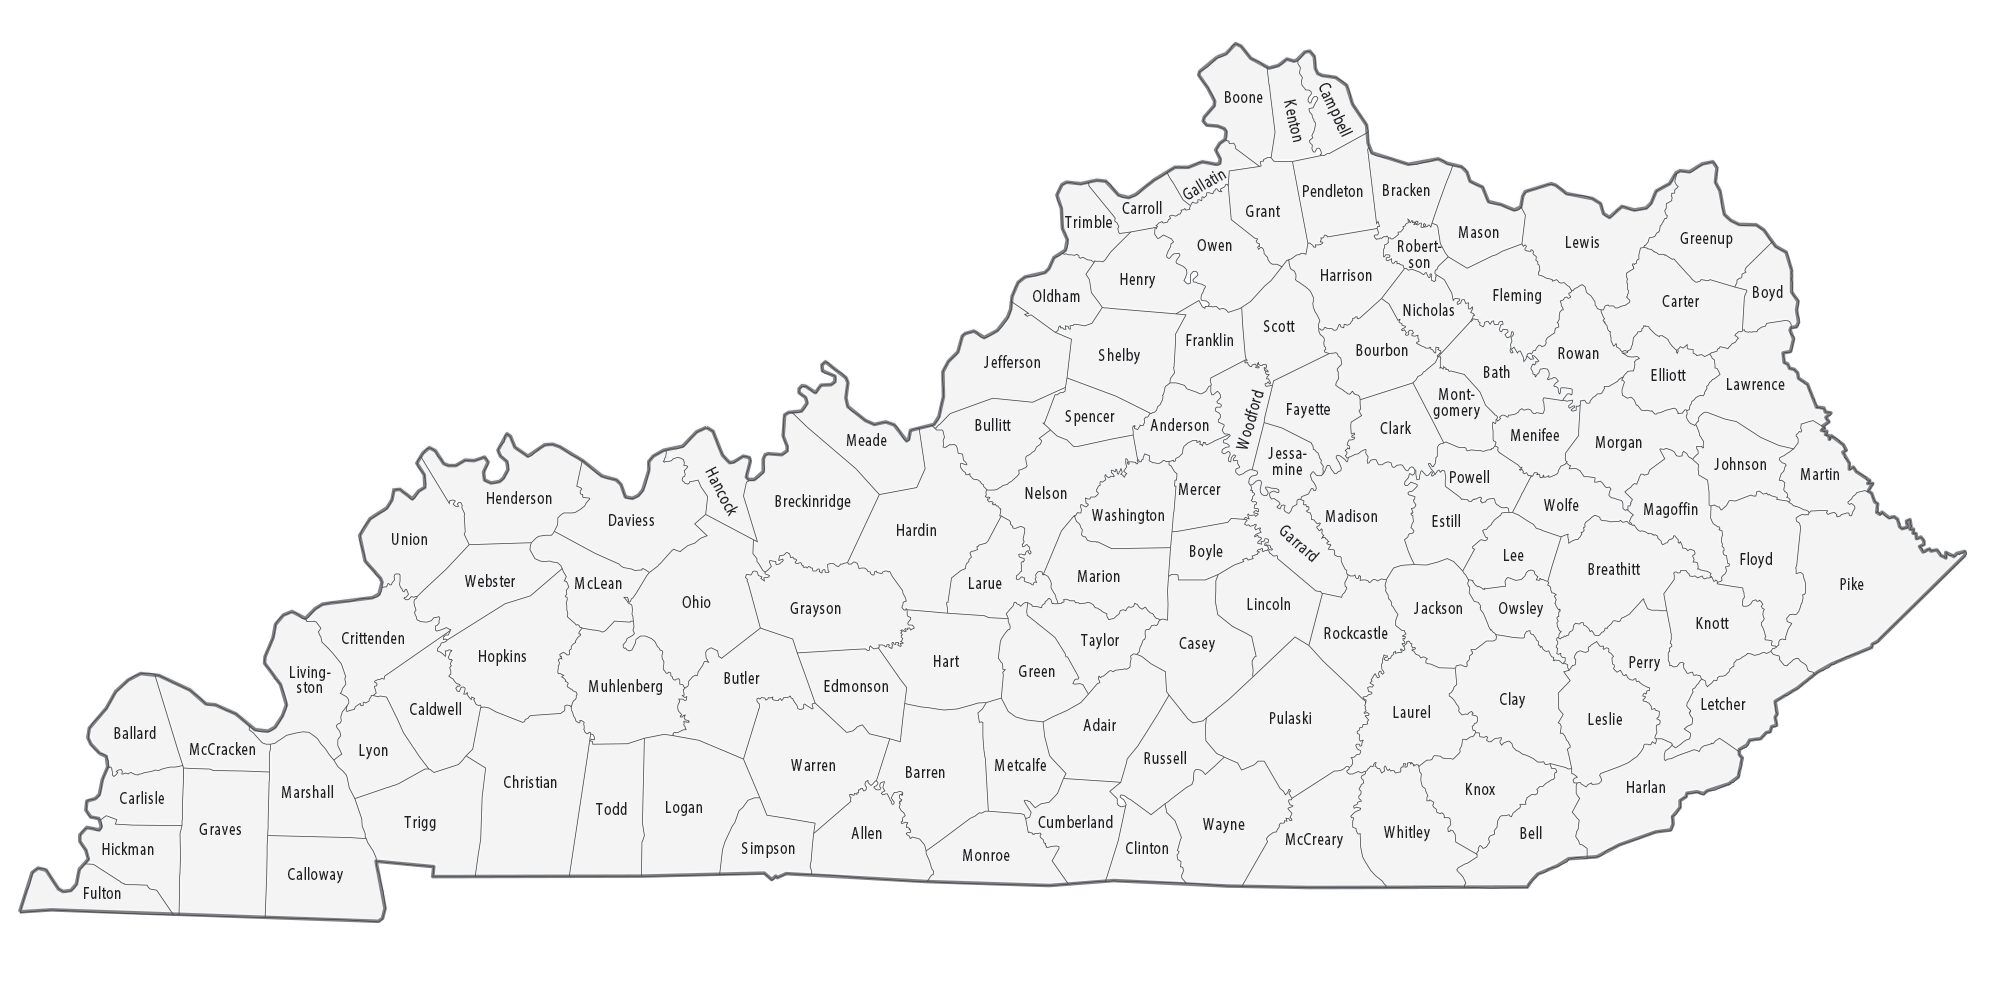 Kentucky County Map - GIS Geography.